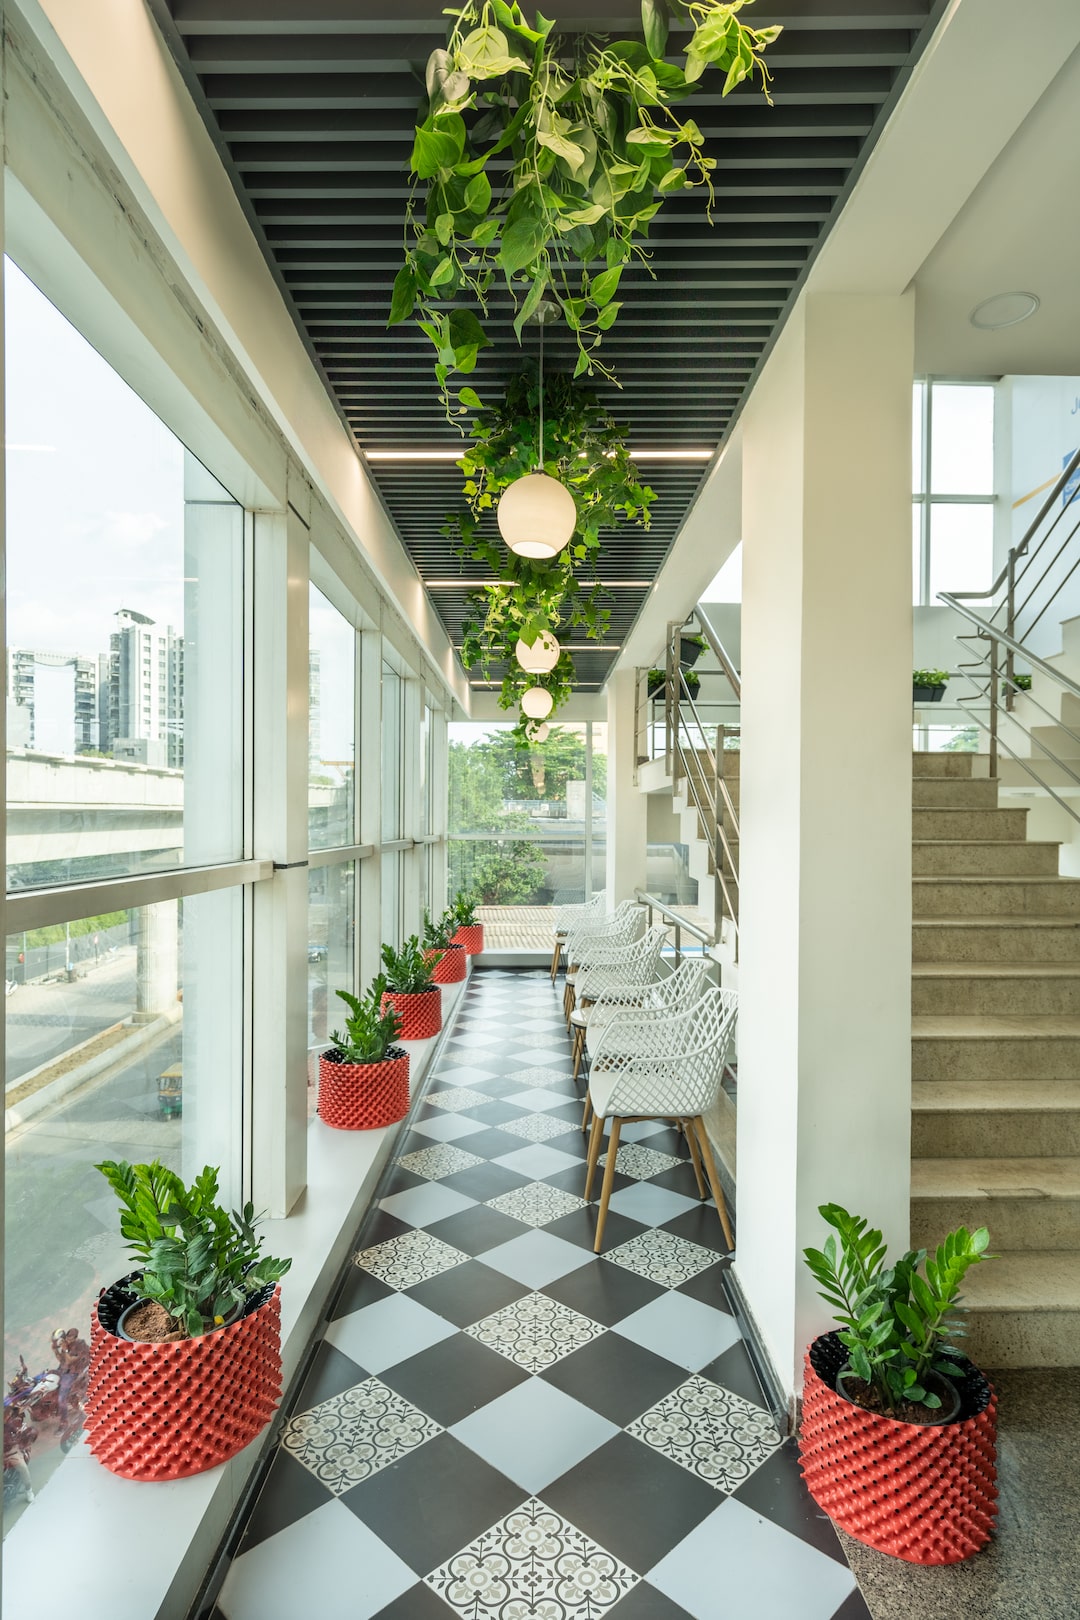 Bring Nature to Your Workspace-11 Benefits of Biophilic Design and Installation-Horticult